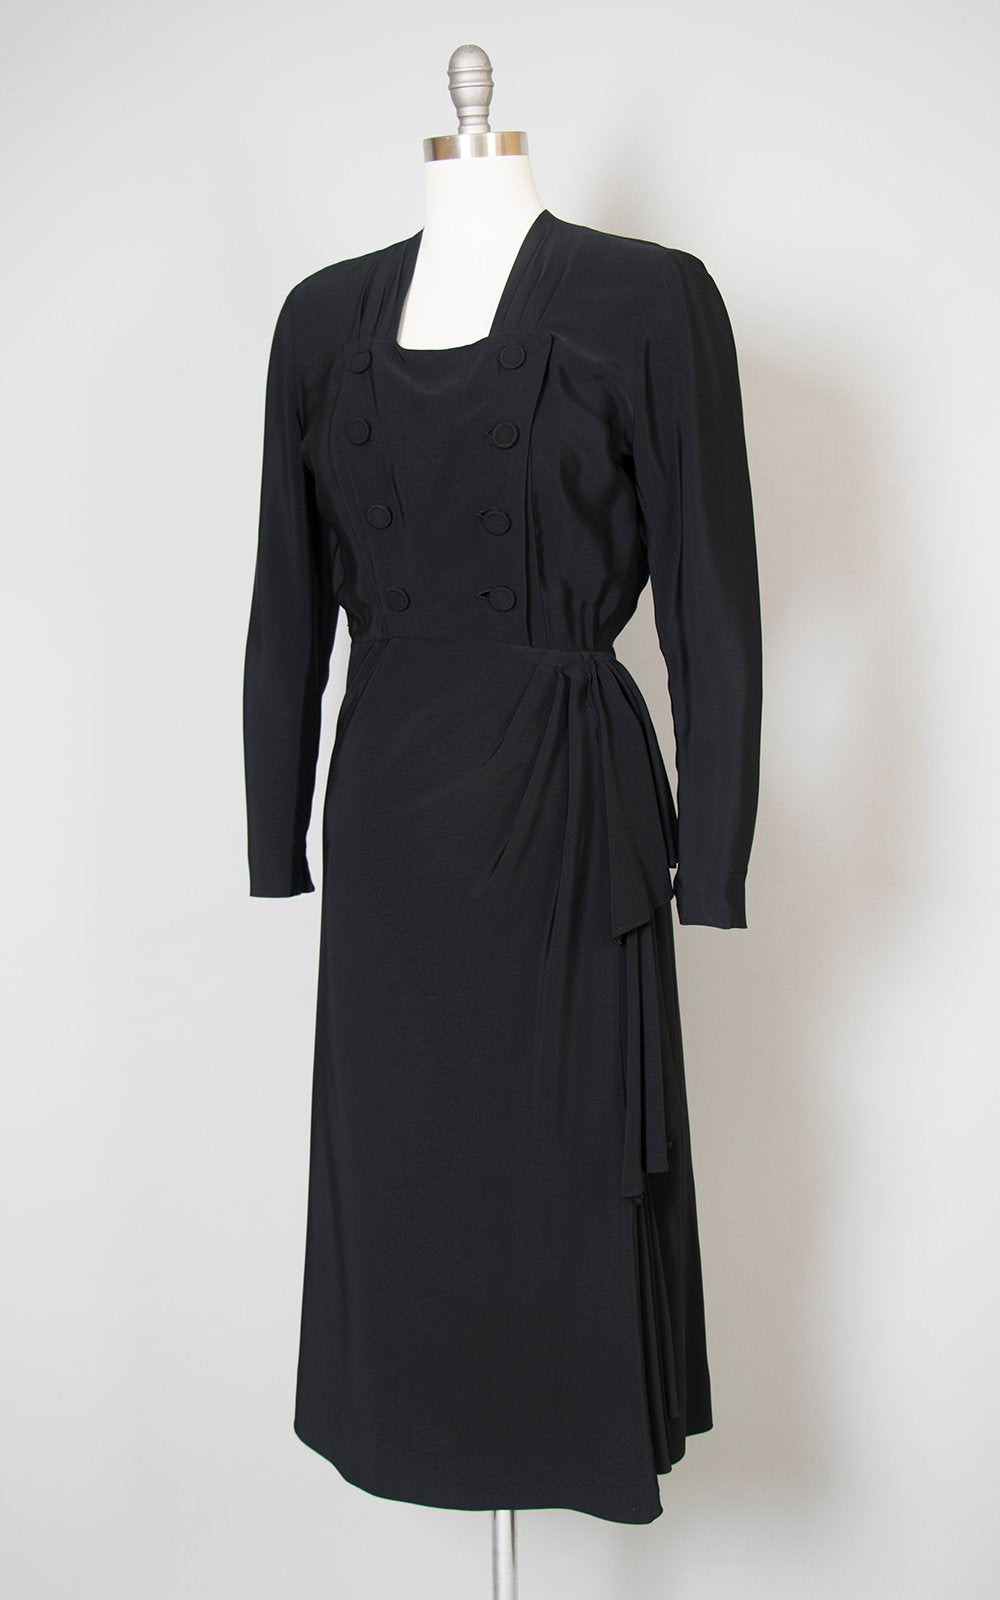 Vintage 1940s Dress | 40s Black Rayon Cocktail Dress Double Breasted Draped Long Sleeve Evening Dress (small)